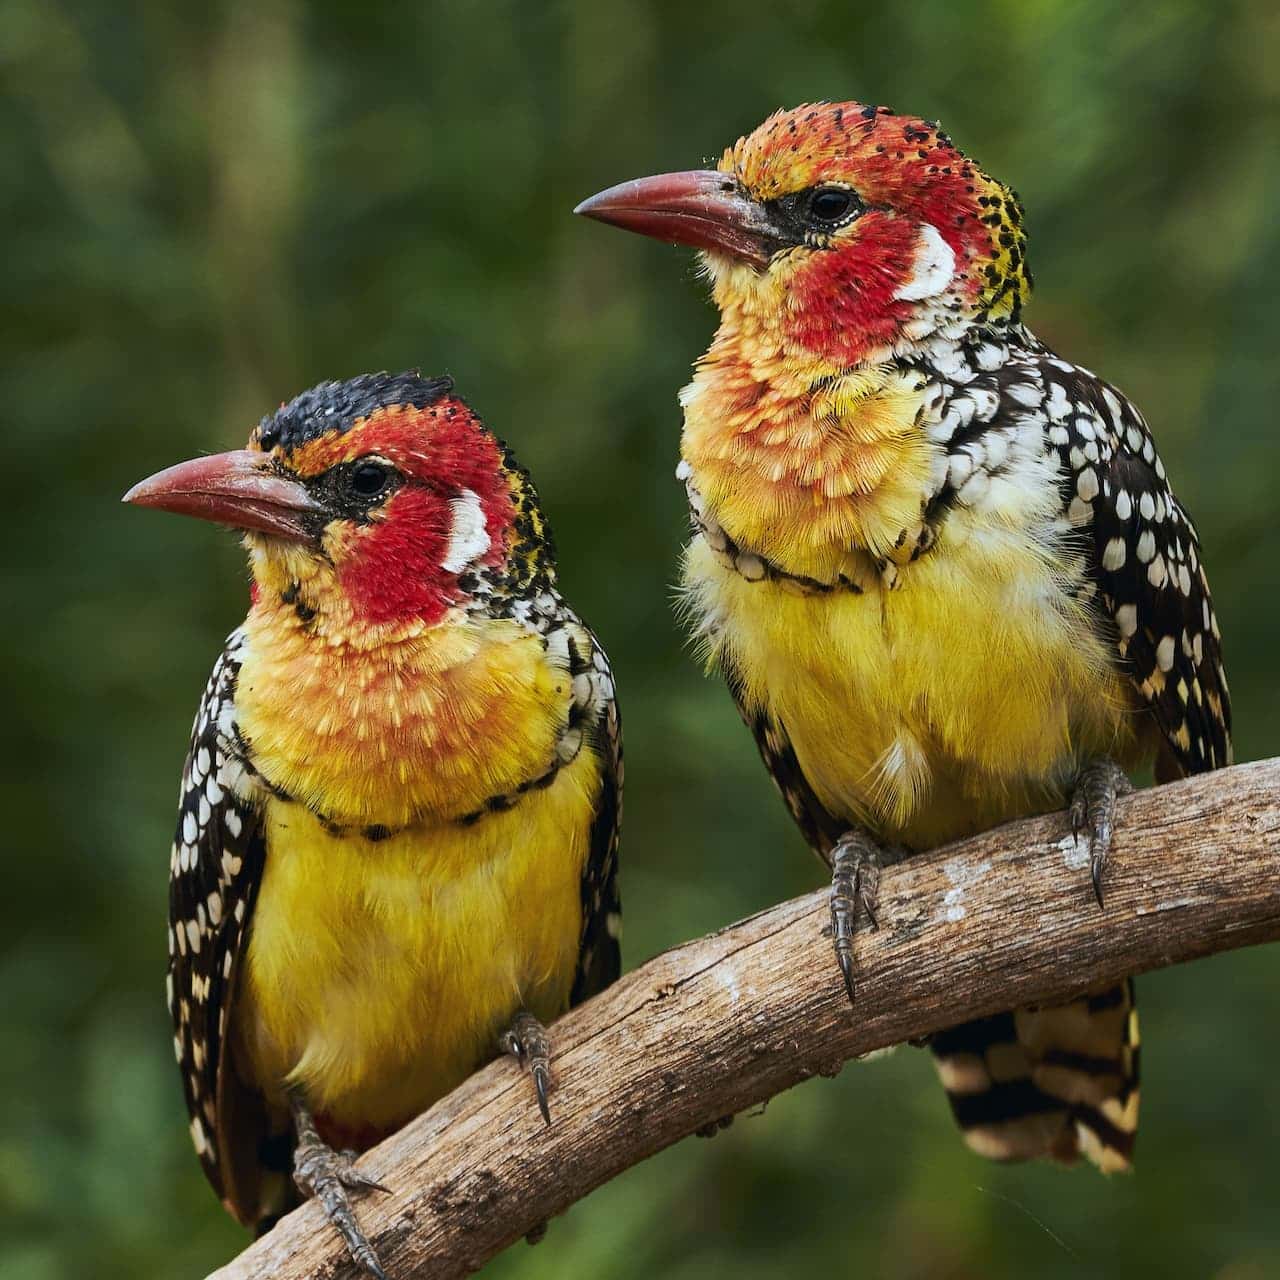 The Two Red-and-yellow Barbets Are Resting In A Branch Of A Tree